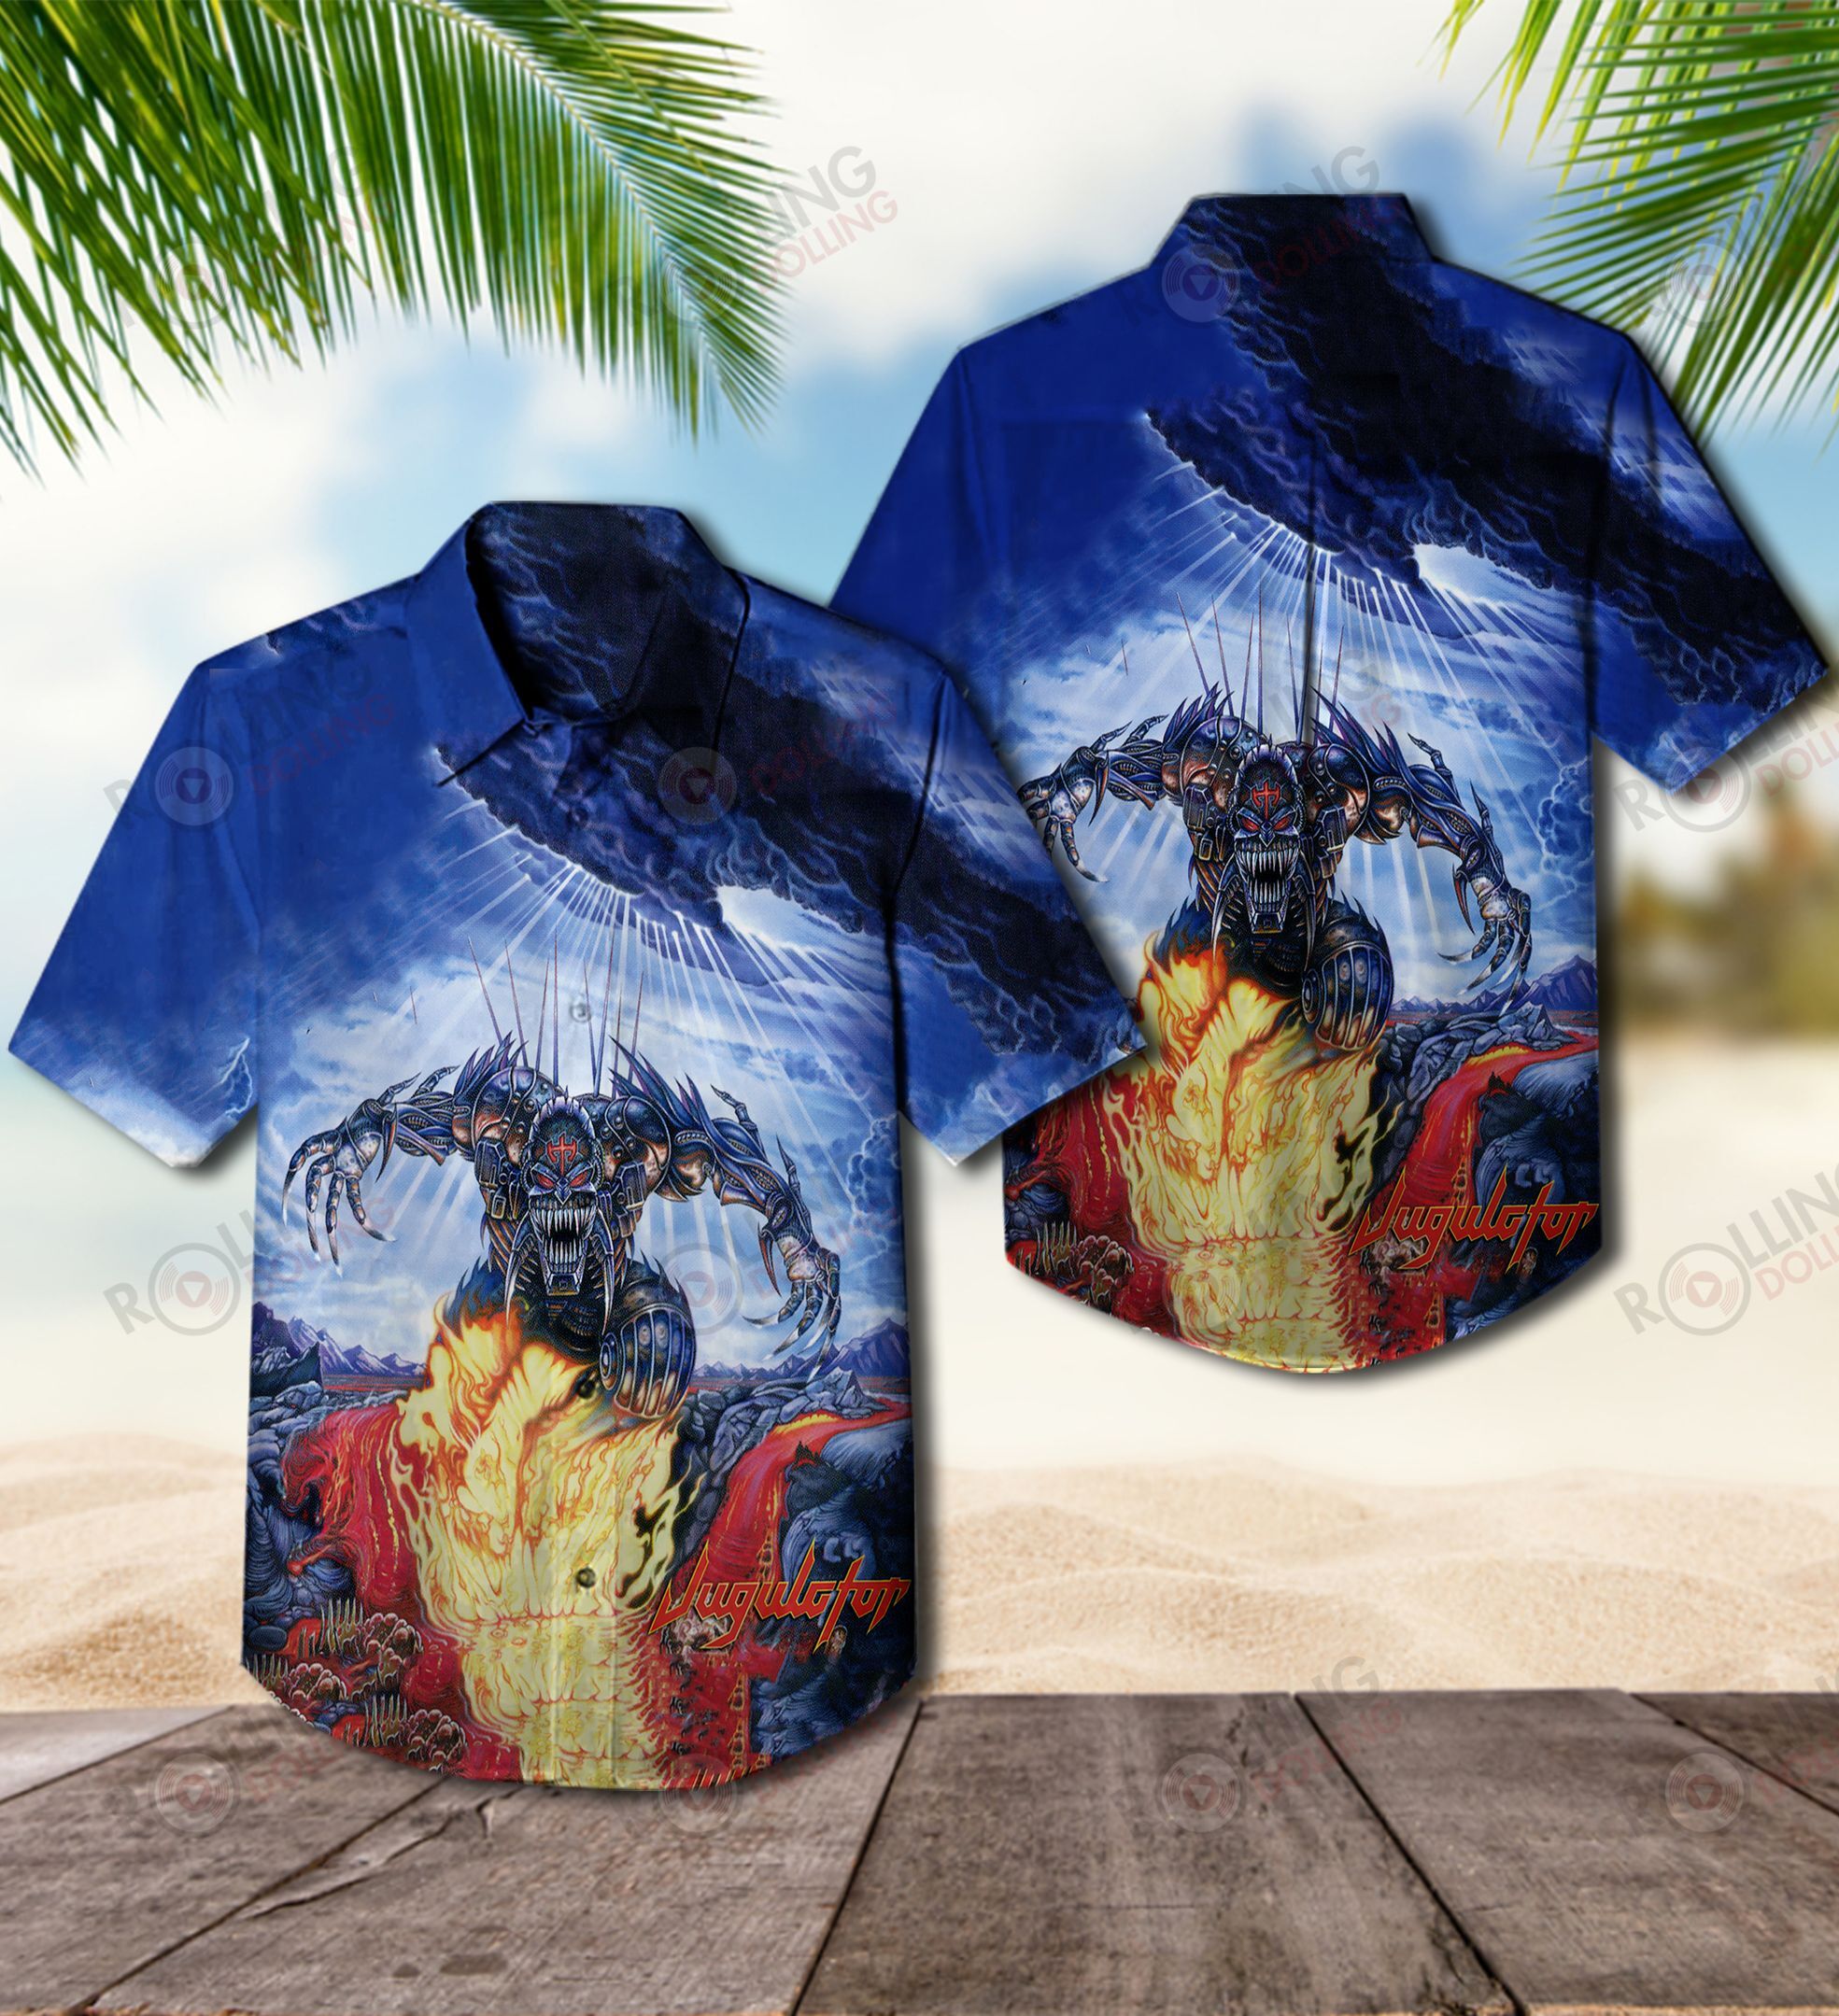 You'll have the perfect vacation outfit with this Hawaiian shirt 181